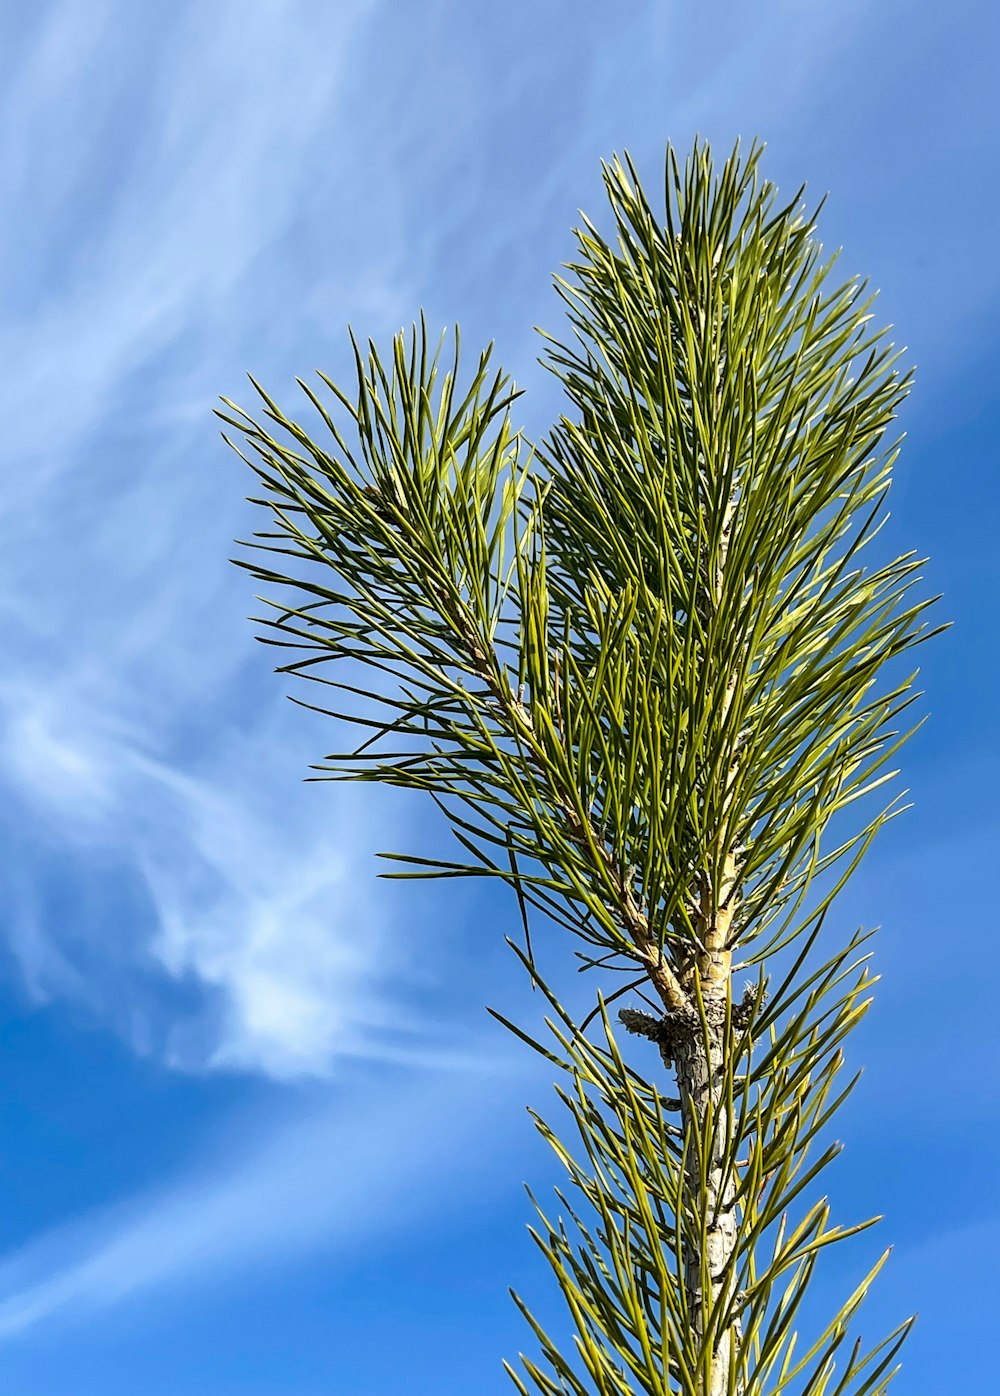 a close up of a pine tree with a blue sky in the background